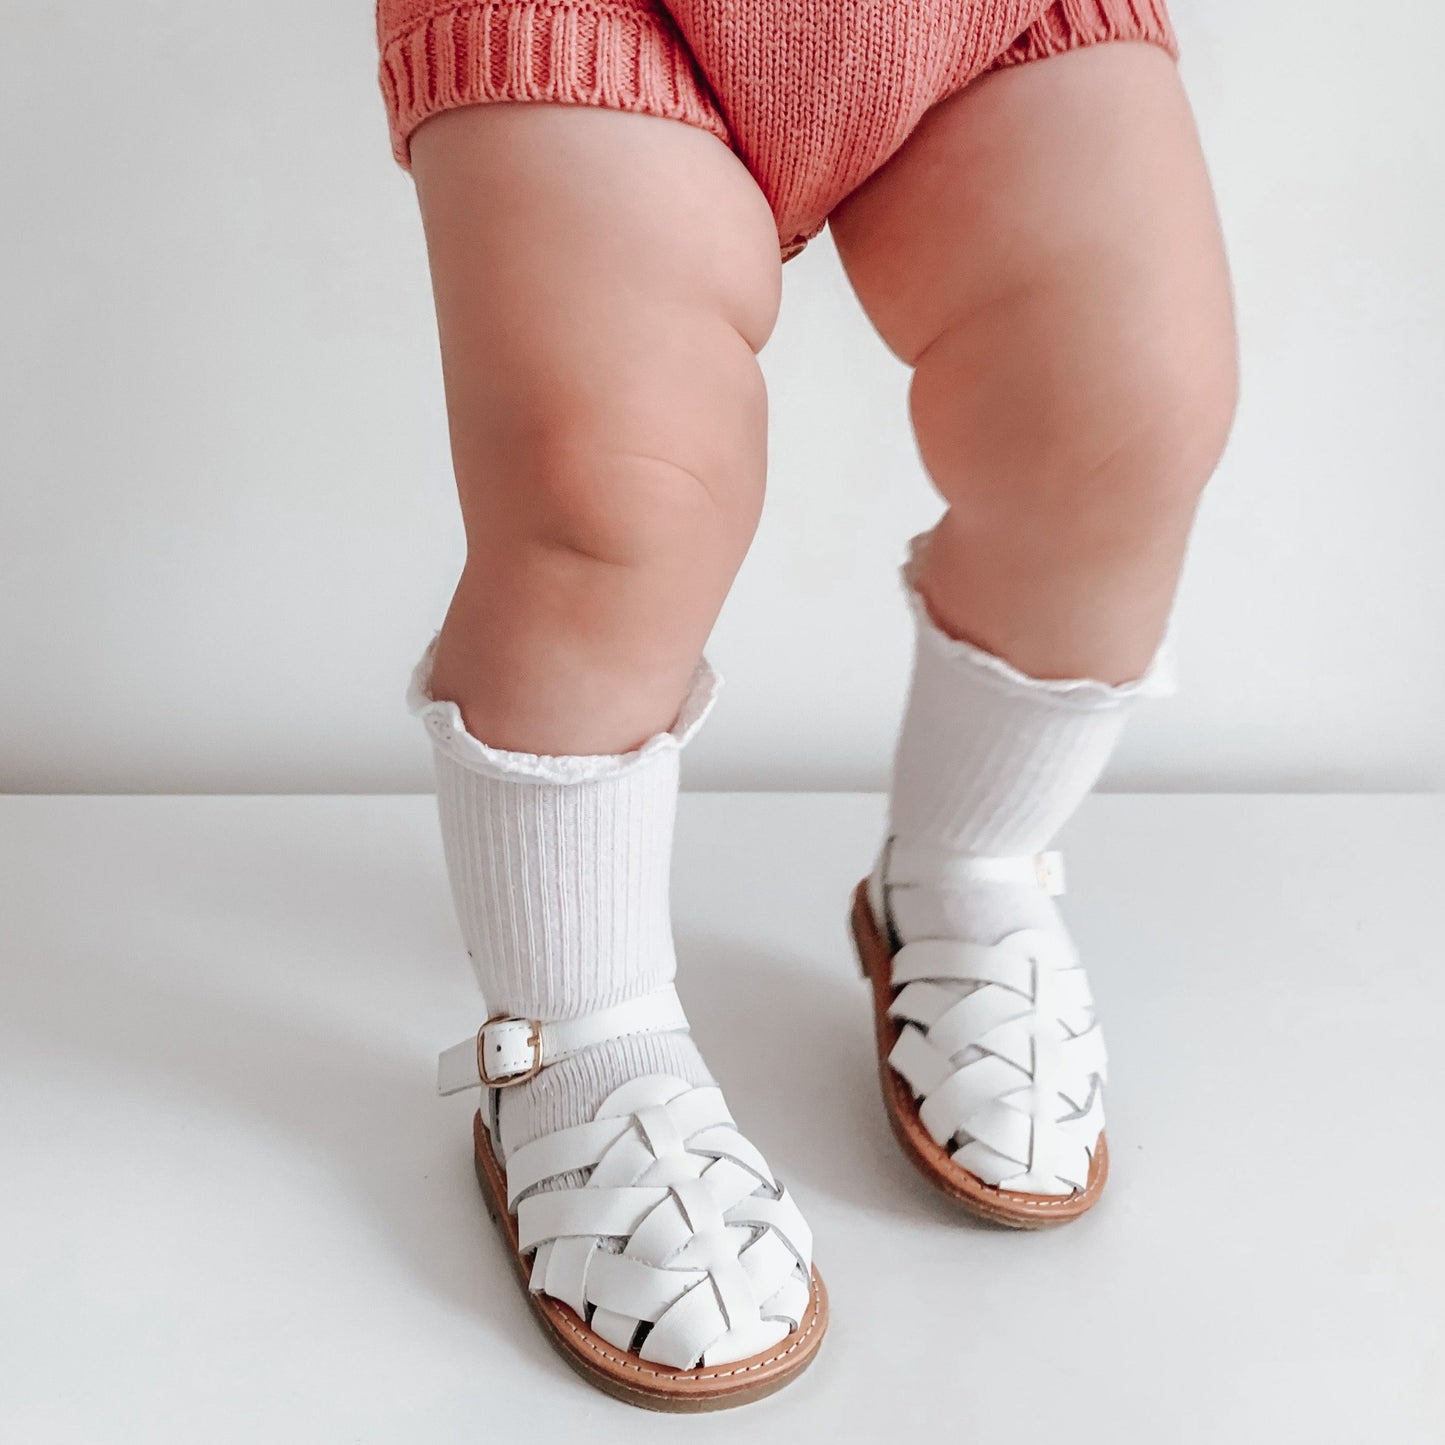 Sandal - Eleanor in White - Classic white sandals for any occasion by Sadie Baby